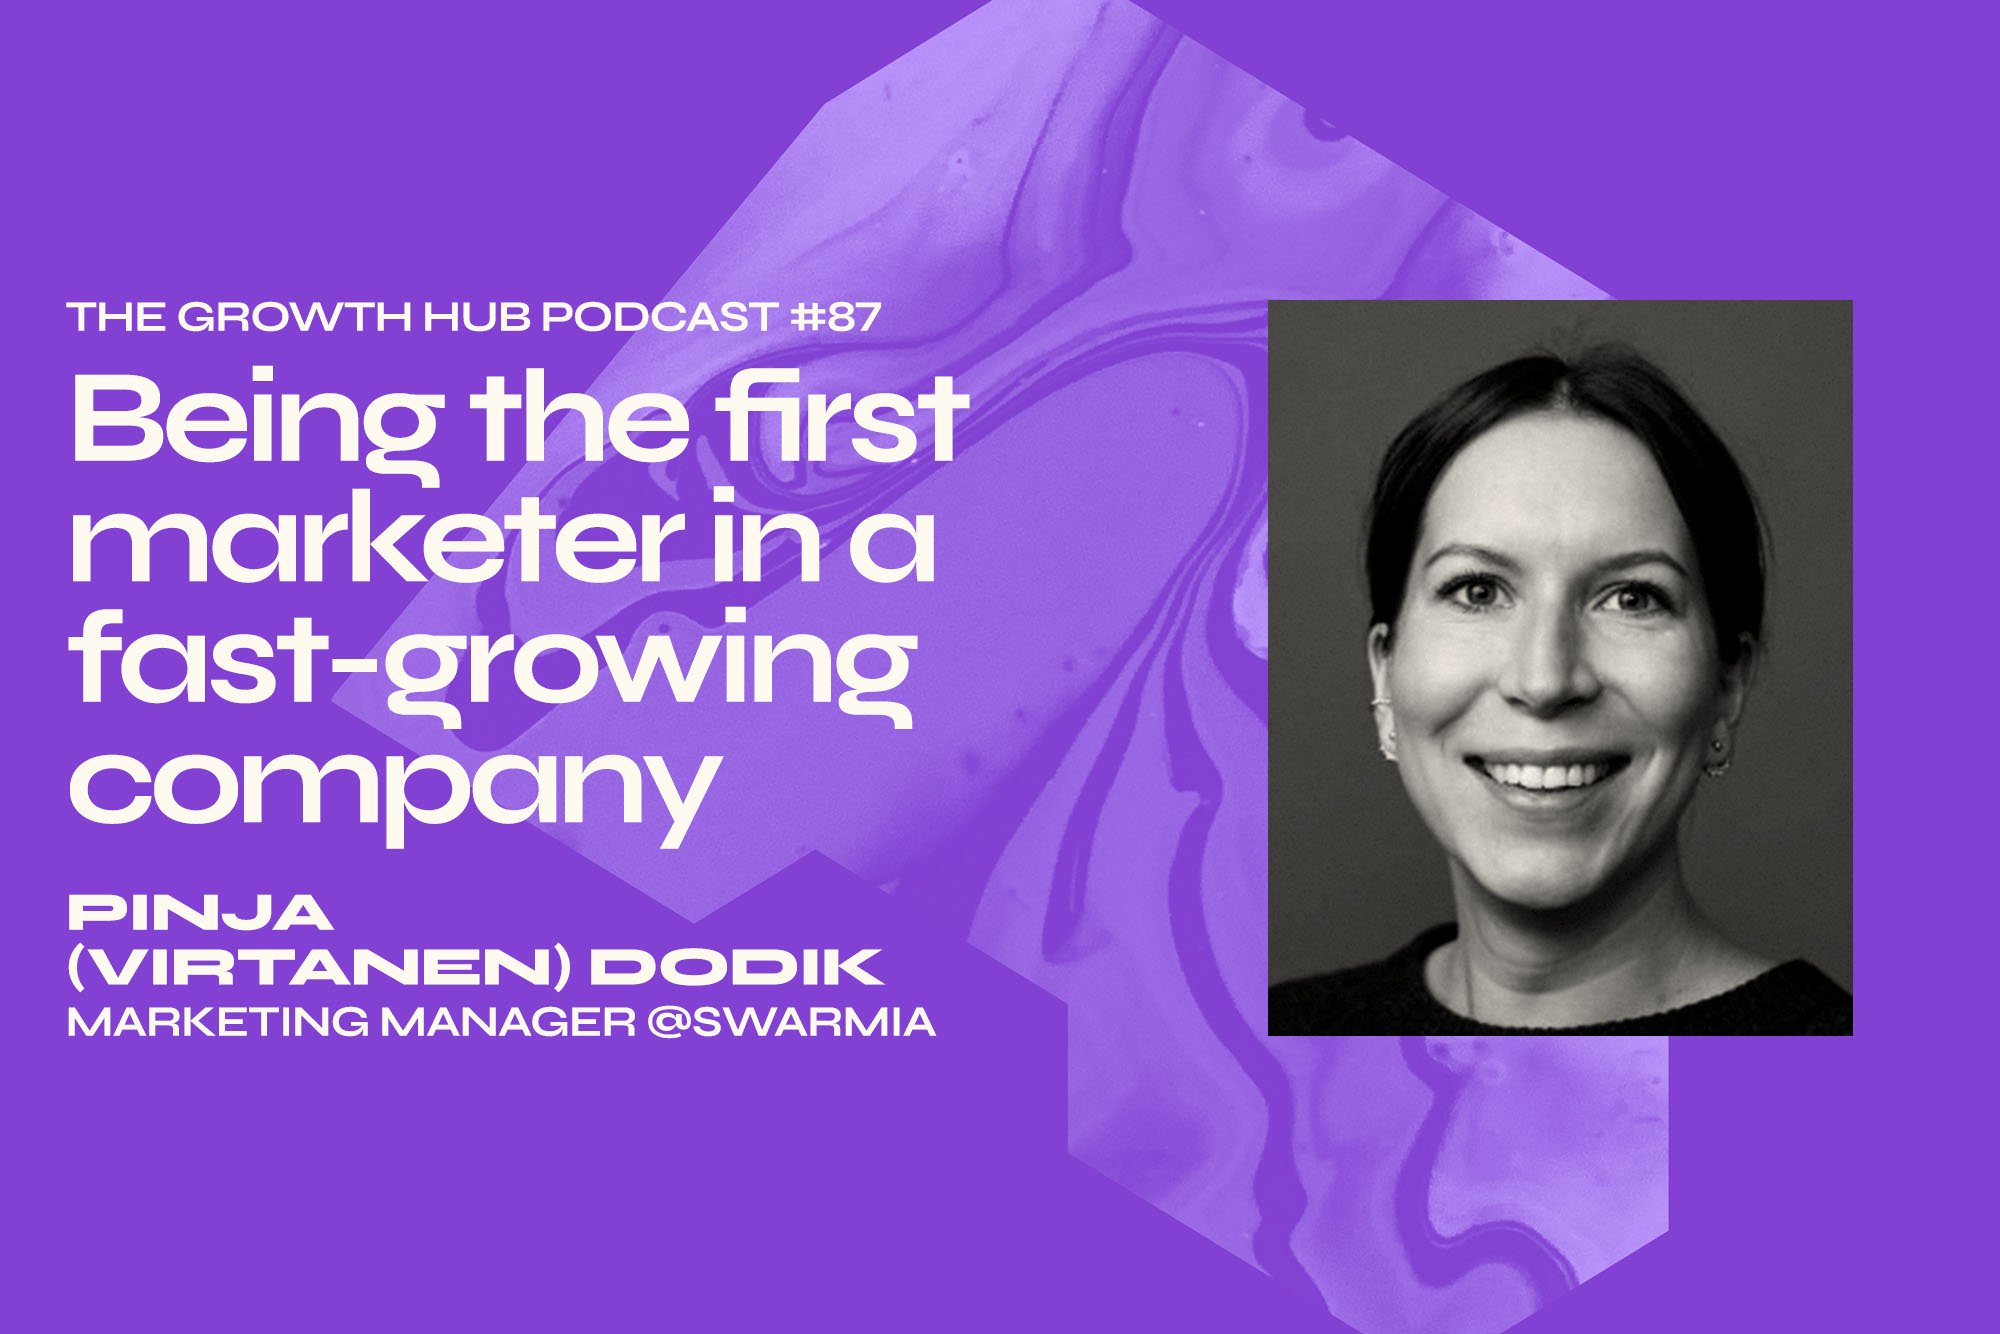 [Podcast] Being the First Marketer in a Fast-Growing Company